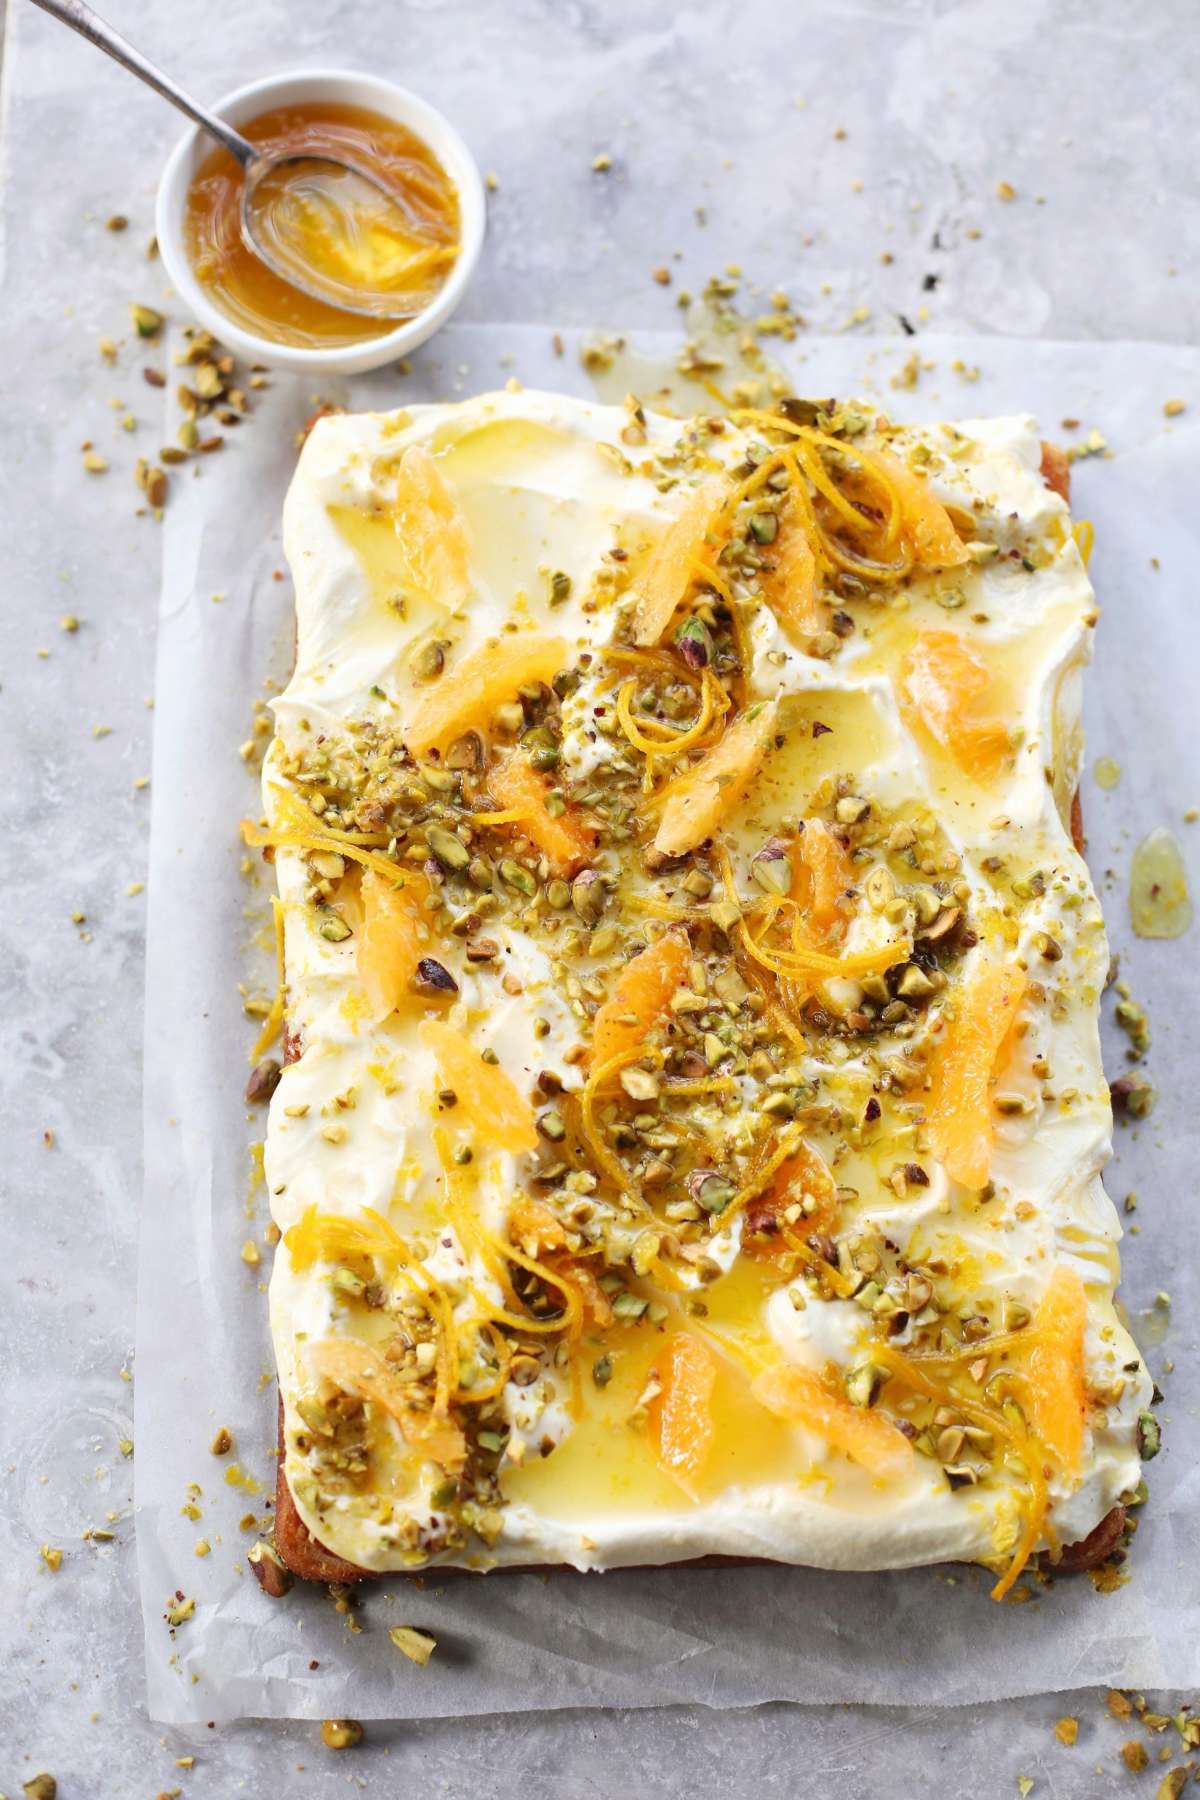 Lemon Curd Sheet Cake with Lemon Ripple Cheesecake Frosting, Candied Orange and Pistachio